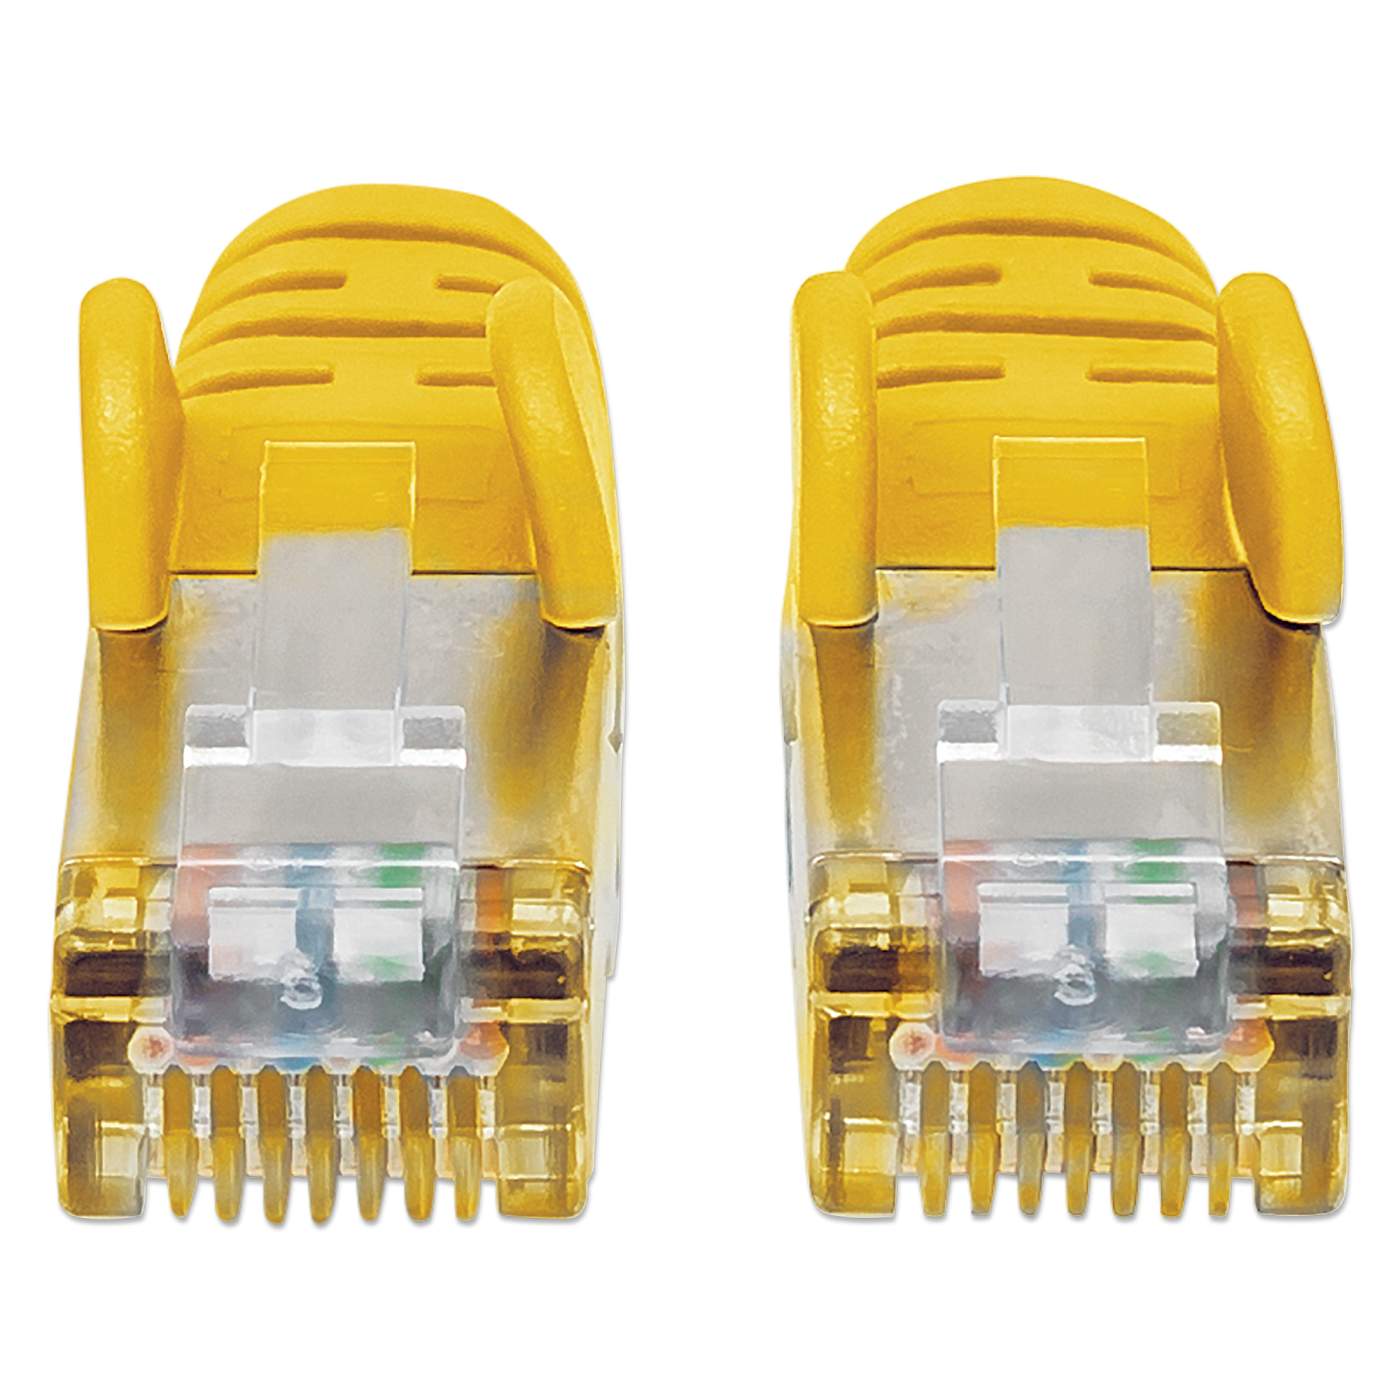 Cat6a S/FTP Network Patch Cable, 25 ft., Yellow Image 4